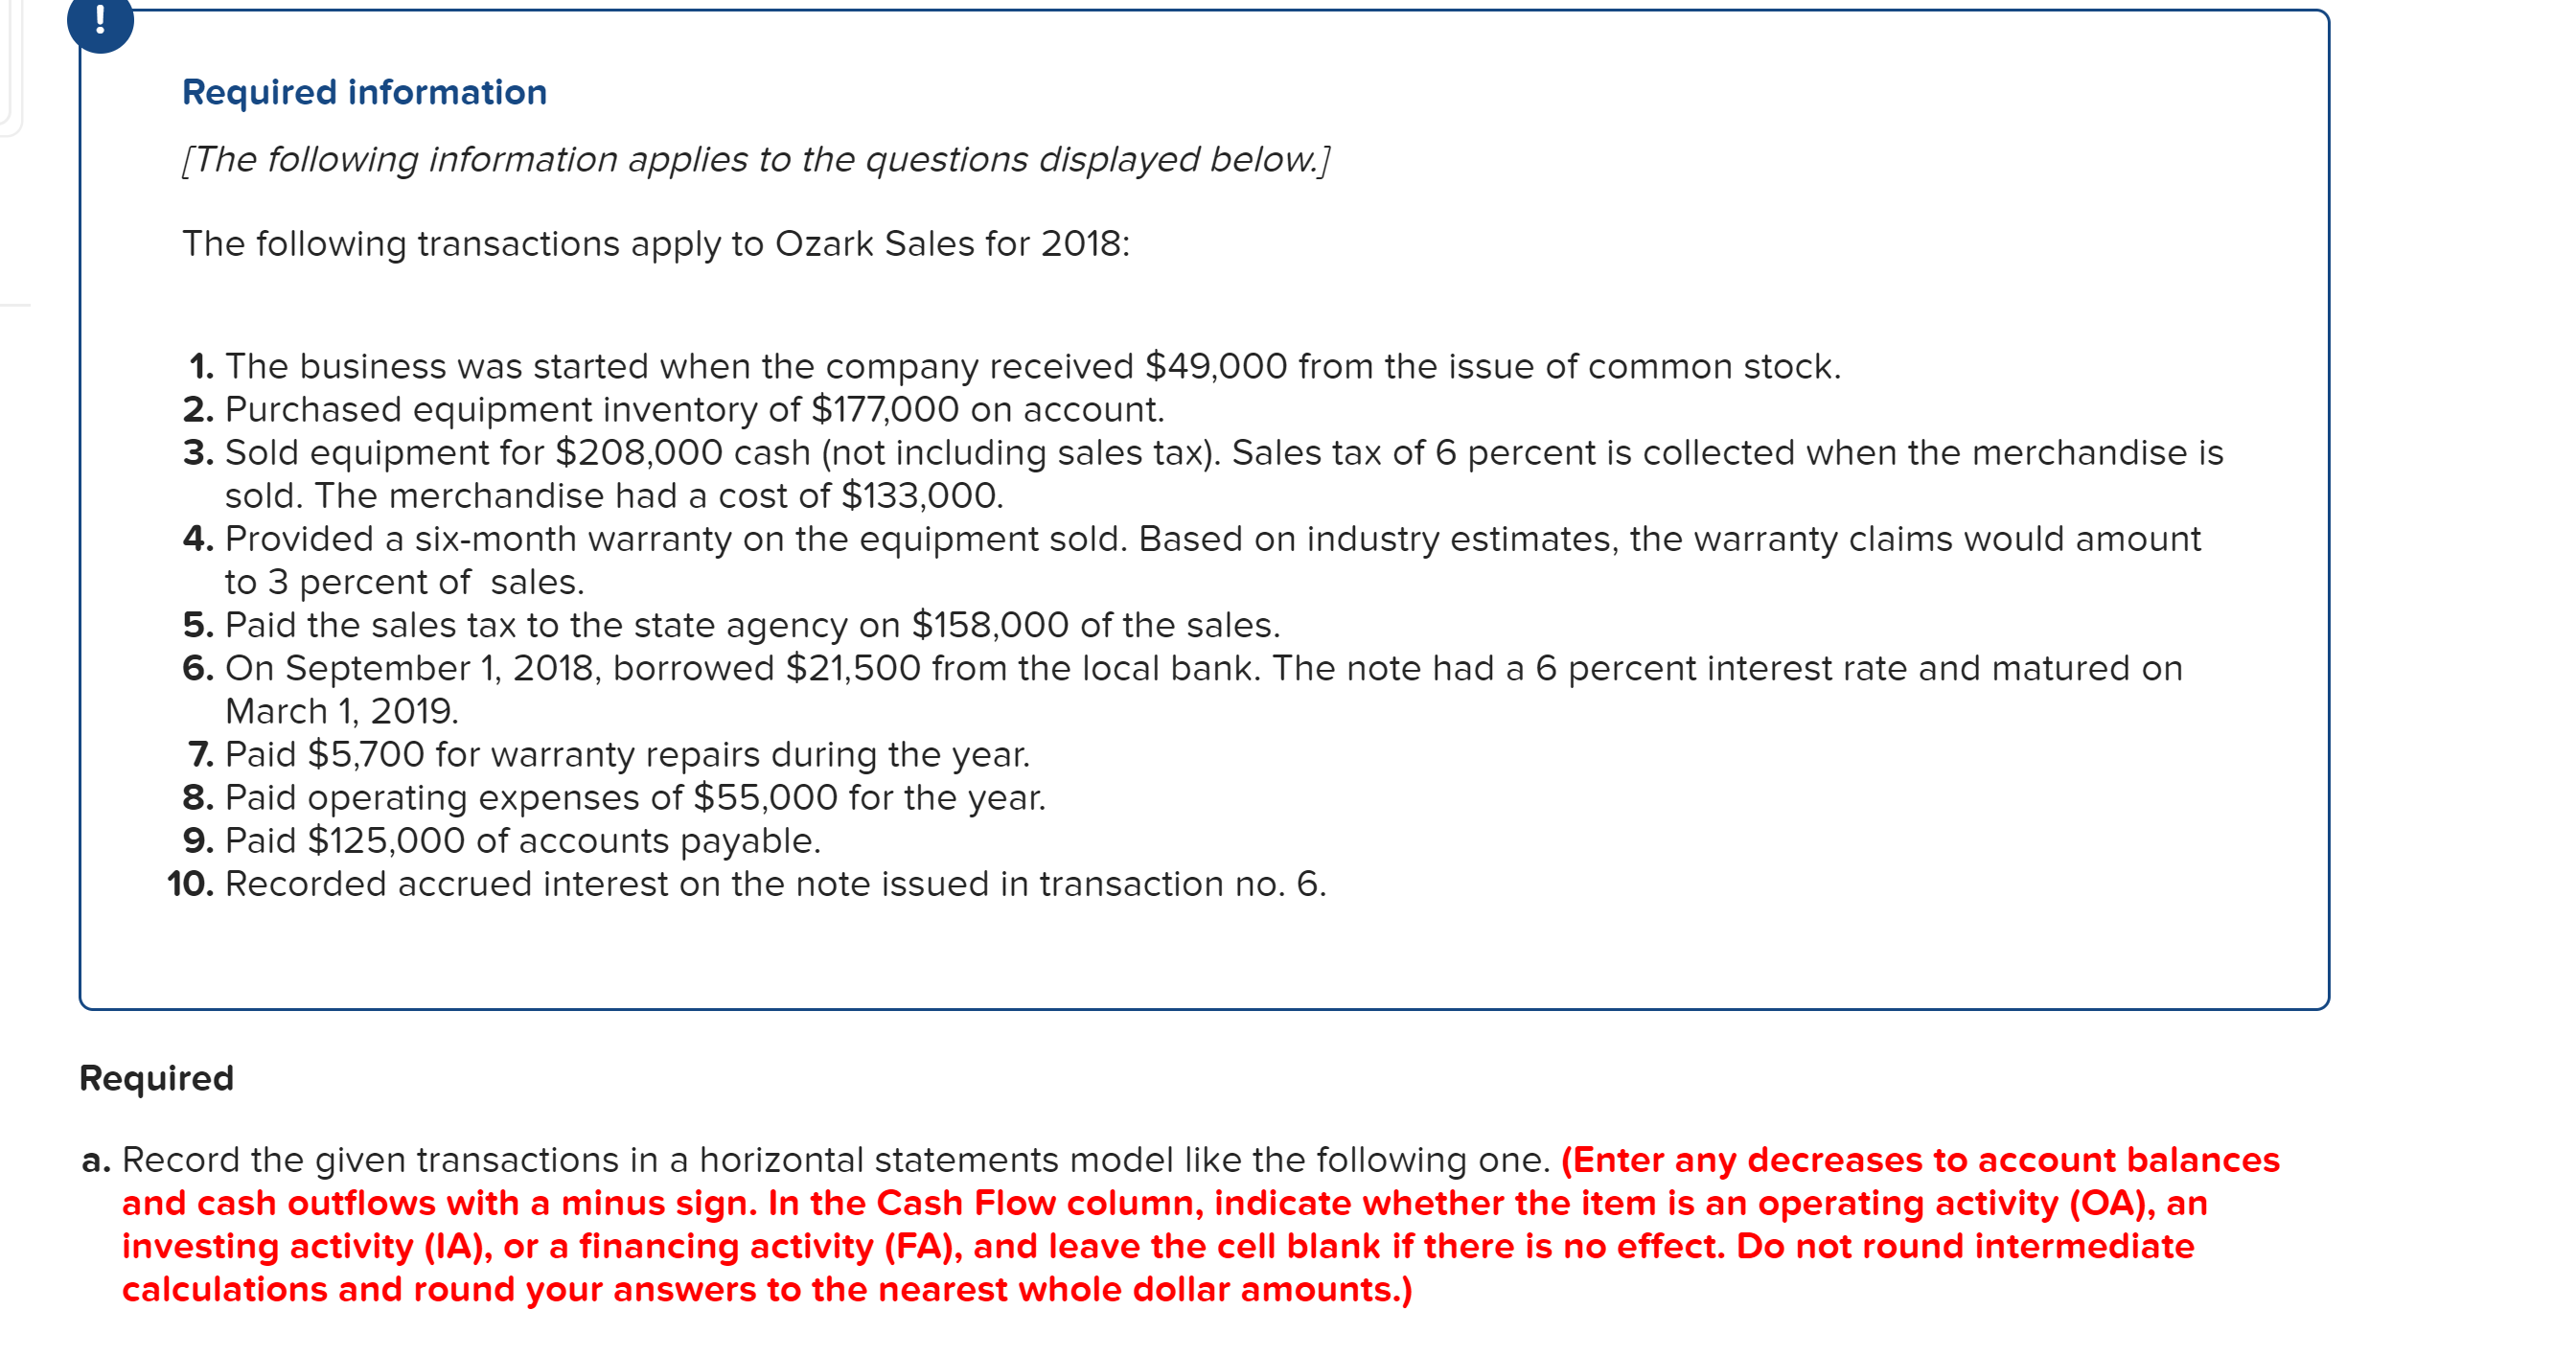 ### Required Information
*The following information applies to the questions displayed below.*

The following transactions apply to Ozark Sales for 2018:

1. The business was started when the company received $49,000 from the issue of common stock.
2. Purchased equipment inventory of $177,000 on account.
3. Sold equipment for $208,000 cash (not including sales tax). Sales tax of 6 percent is collected when the merchandise is sold. The merchandise had a cost of $133,000.
4. Provided a six-month warranty on the equipment sold. Based on industry estimates, the warranty claims would amount to 3 percent of sales.
5. Paid the sales tax to the state agency on $158,000 of the sales.
6. On September 1, 2018, borrowed $21,500 from the local bank. The note had a 6 percent interest rate and matured on March 1, 2019.
7. Paid $5,700 for warranty repairs during the year.
8. Paid operating expenses of $55,000 for the year.
9. Paid $125,000 of accounts payable.
10. Recorded accrued interest on the note issued in transaction no. 6.

### Required 
a. Record the given transactions in a horizontal statements model like the following one. *(Enter any decreases to account balances and cash outflows with a minus sign. In the Cash Flow column, indicate whether the item is an operating activity (OA), an investing activity (IA), or a financing activity (FA), and leave the cell blank if there is no effect. Do not round intermediate calculations and round your answers to the nearest whole dollar amounts.)*

---

Please note: Since this transcription does not include the specific horizontal statements model referenced (as no diagram or table was provided), educators should refer to or create an equivalent table for students to input the transactions.

For further assistance with the structure or examples of horizontal statements models, students can refer to standard accounting textbooks or resources.